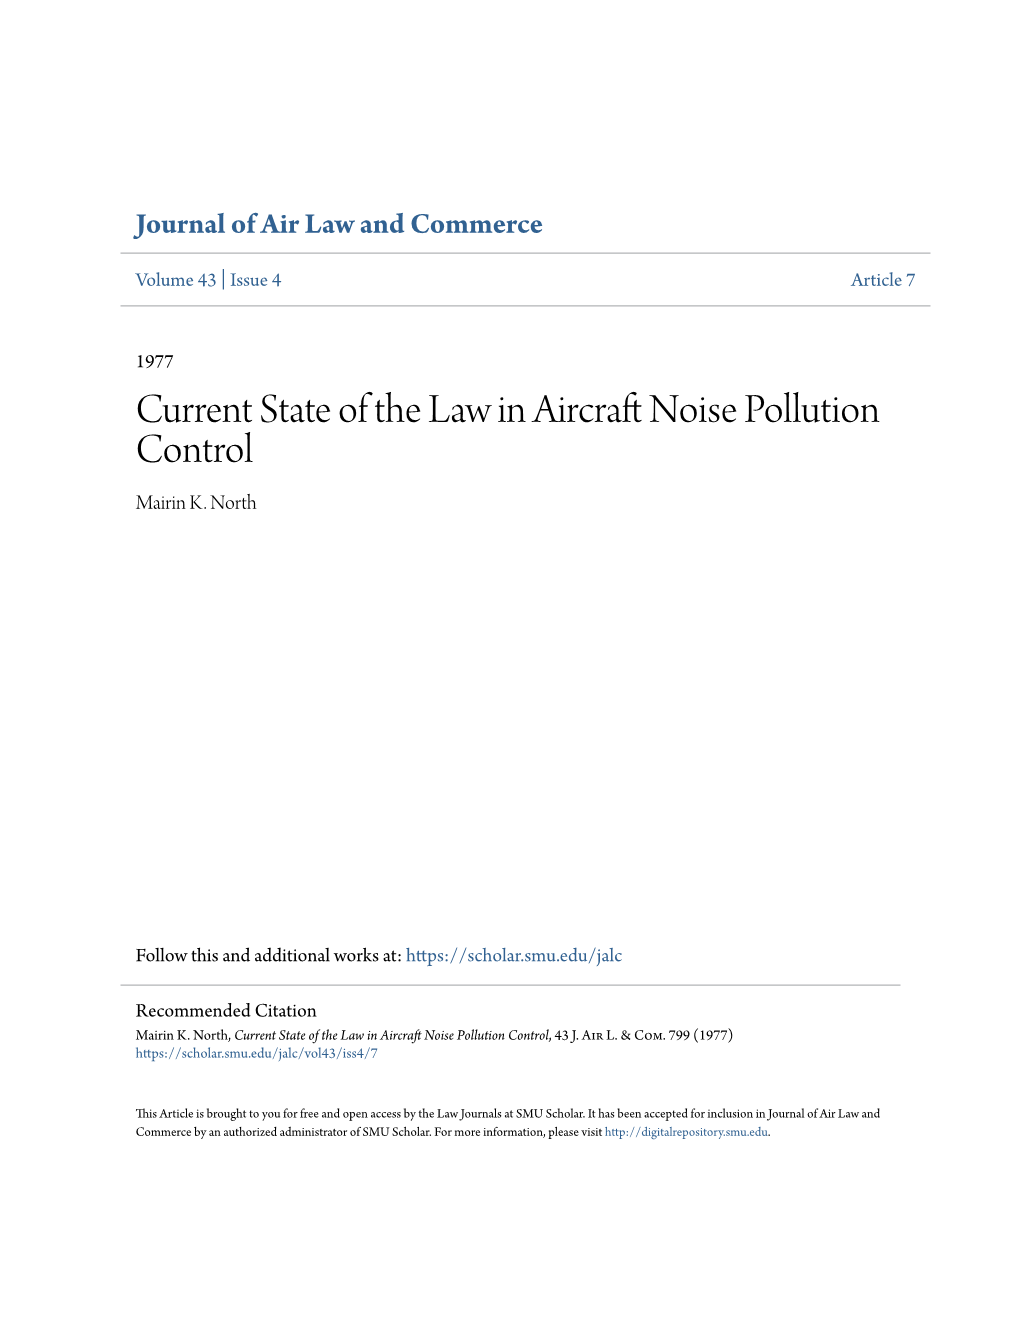 Current State of the Law in Aircraft Noise Pollution Control